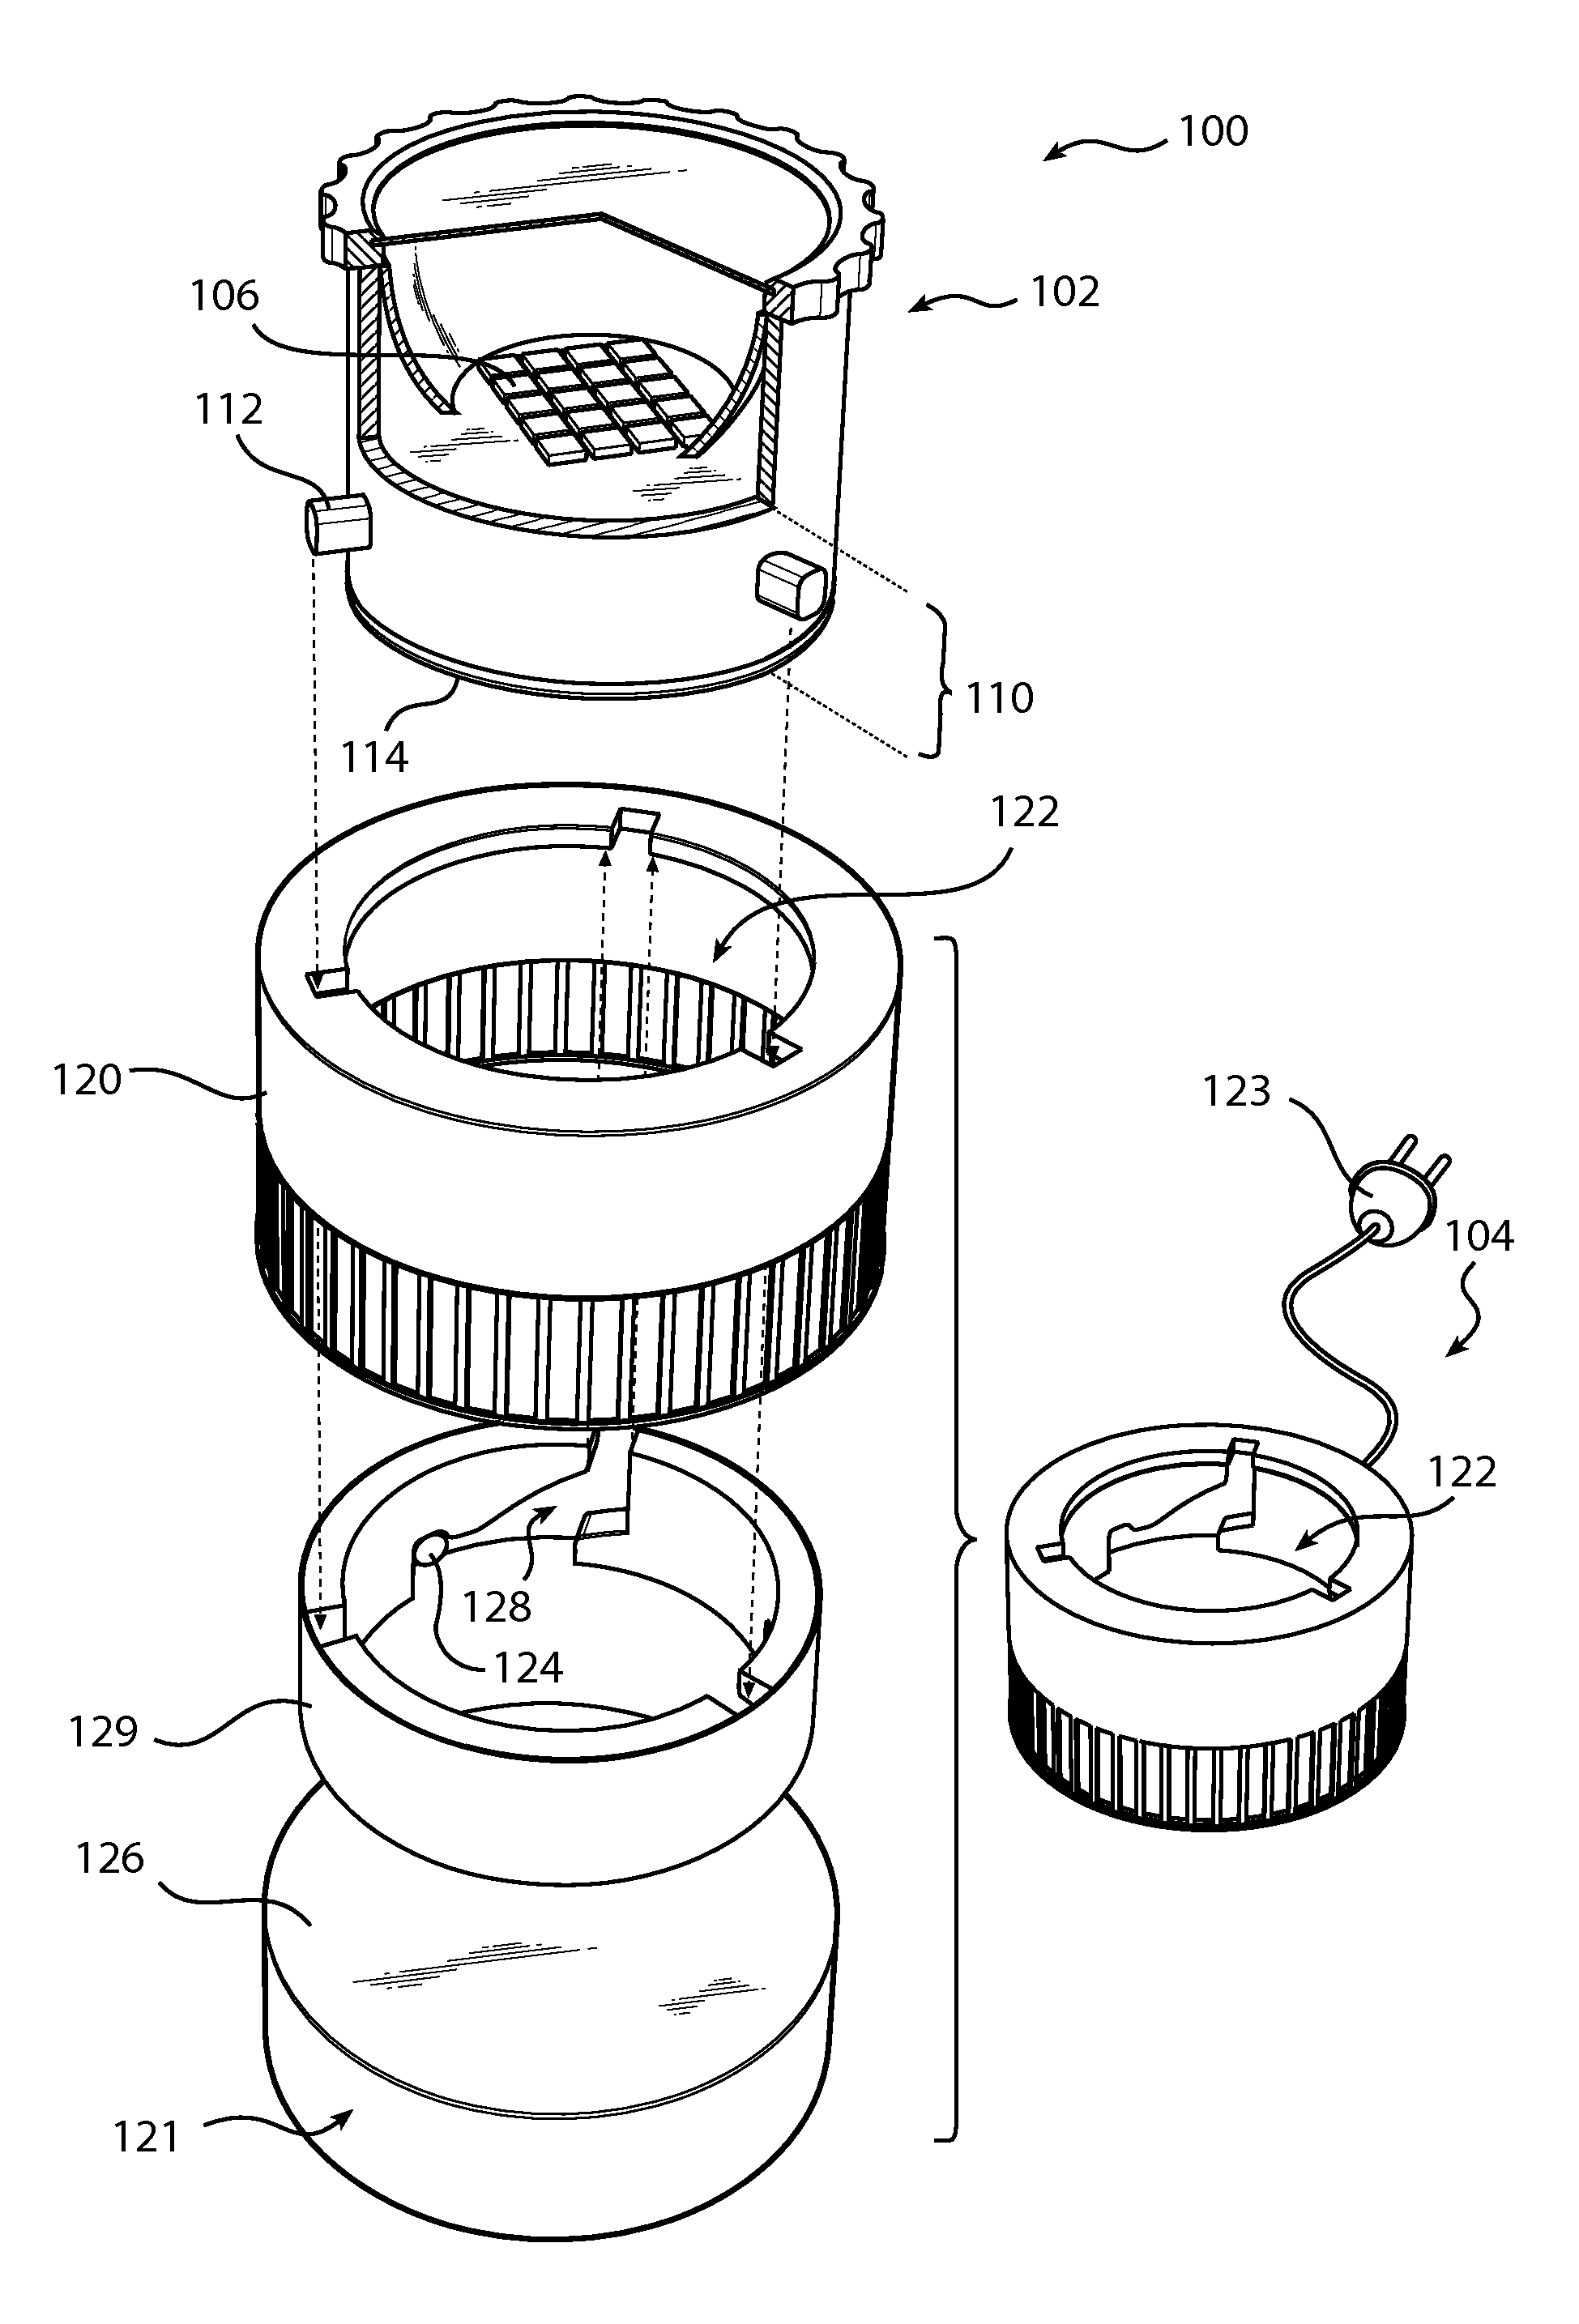 Illumination device comprising an internal power source and an interface for connecting the illumination device to an external power supply